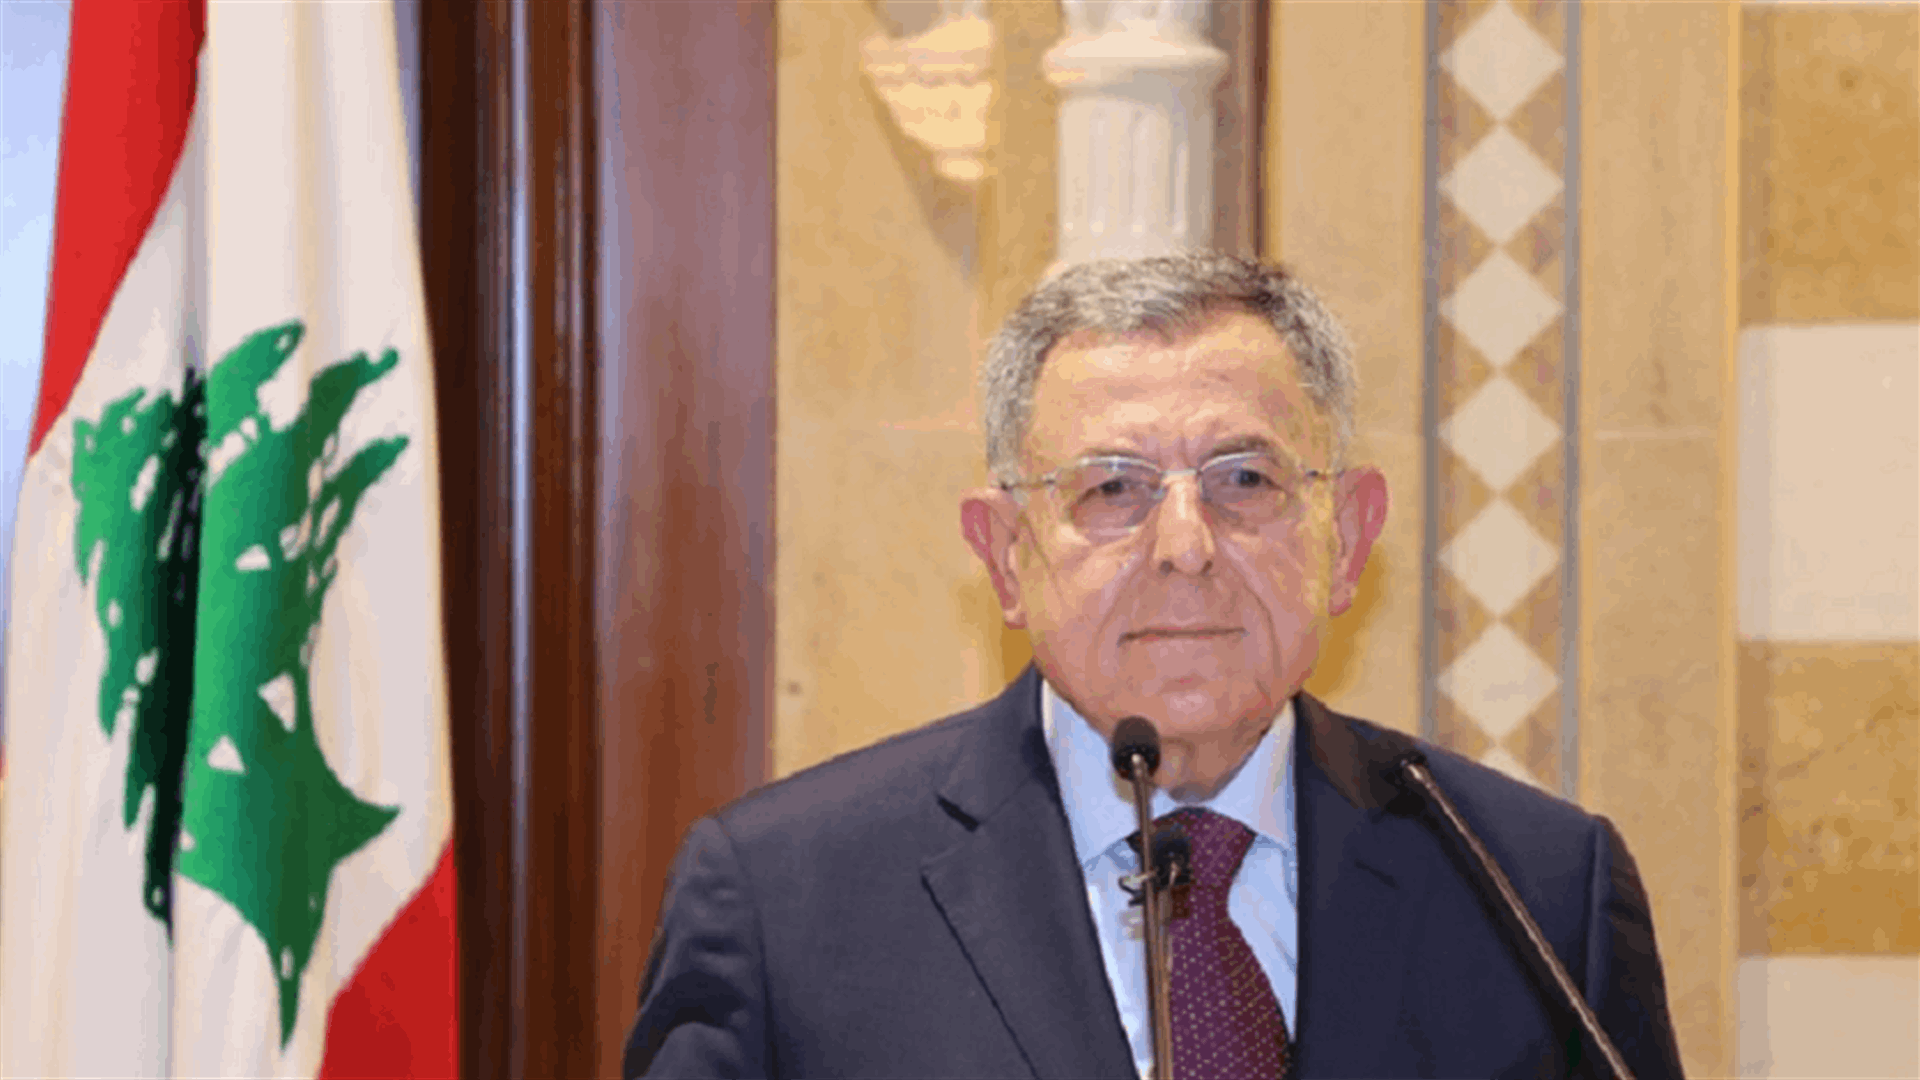 Siniora: Rebuilding the country is impossible as long as Hezbollah controls the state